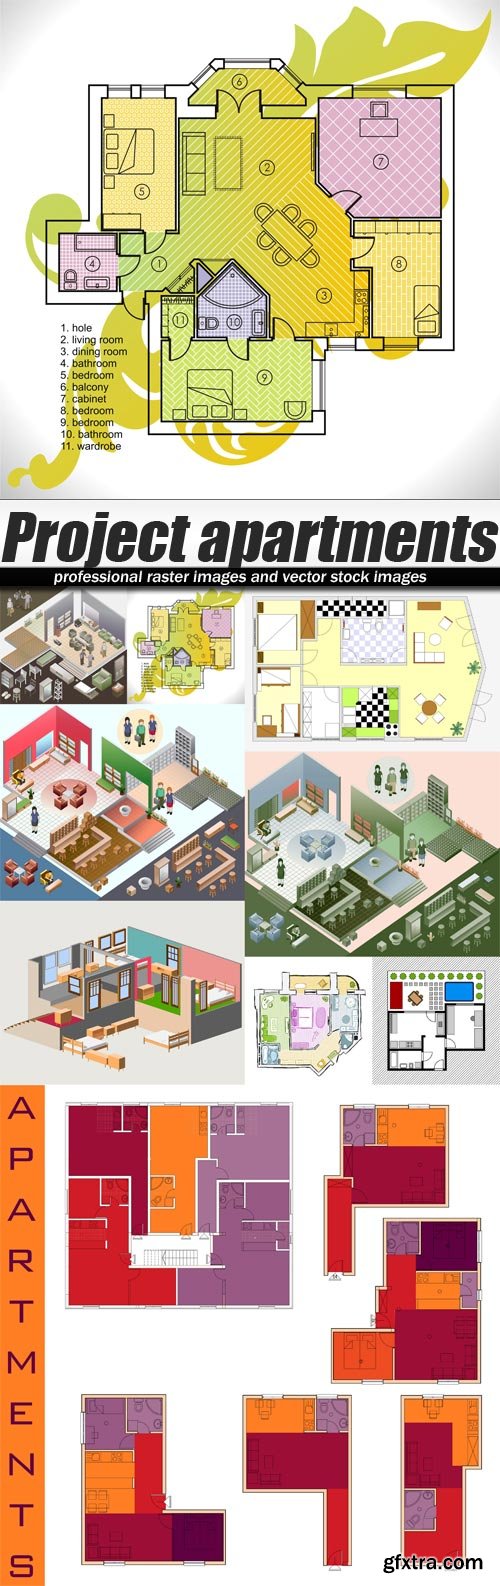 Project apartments